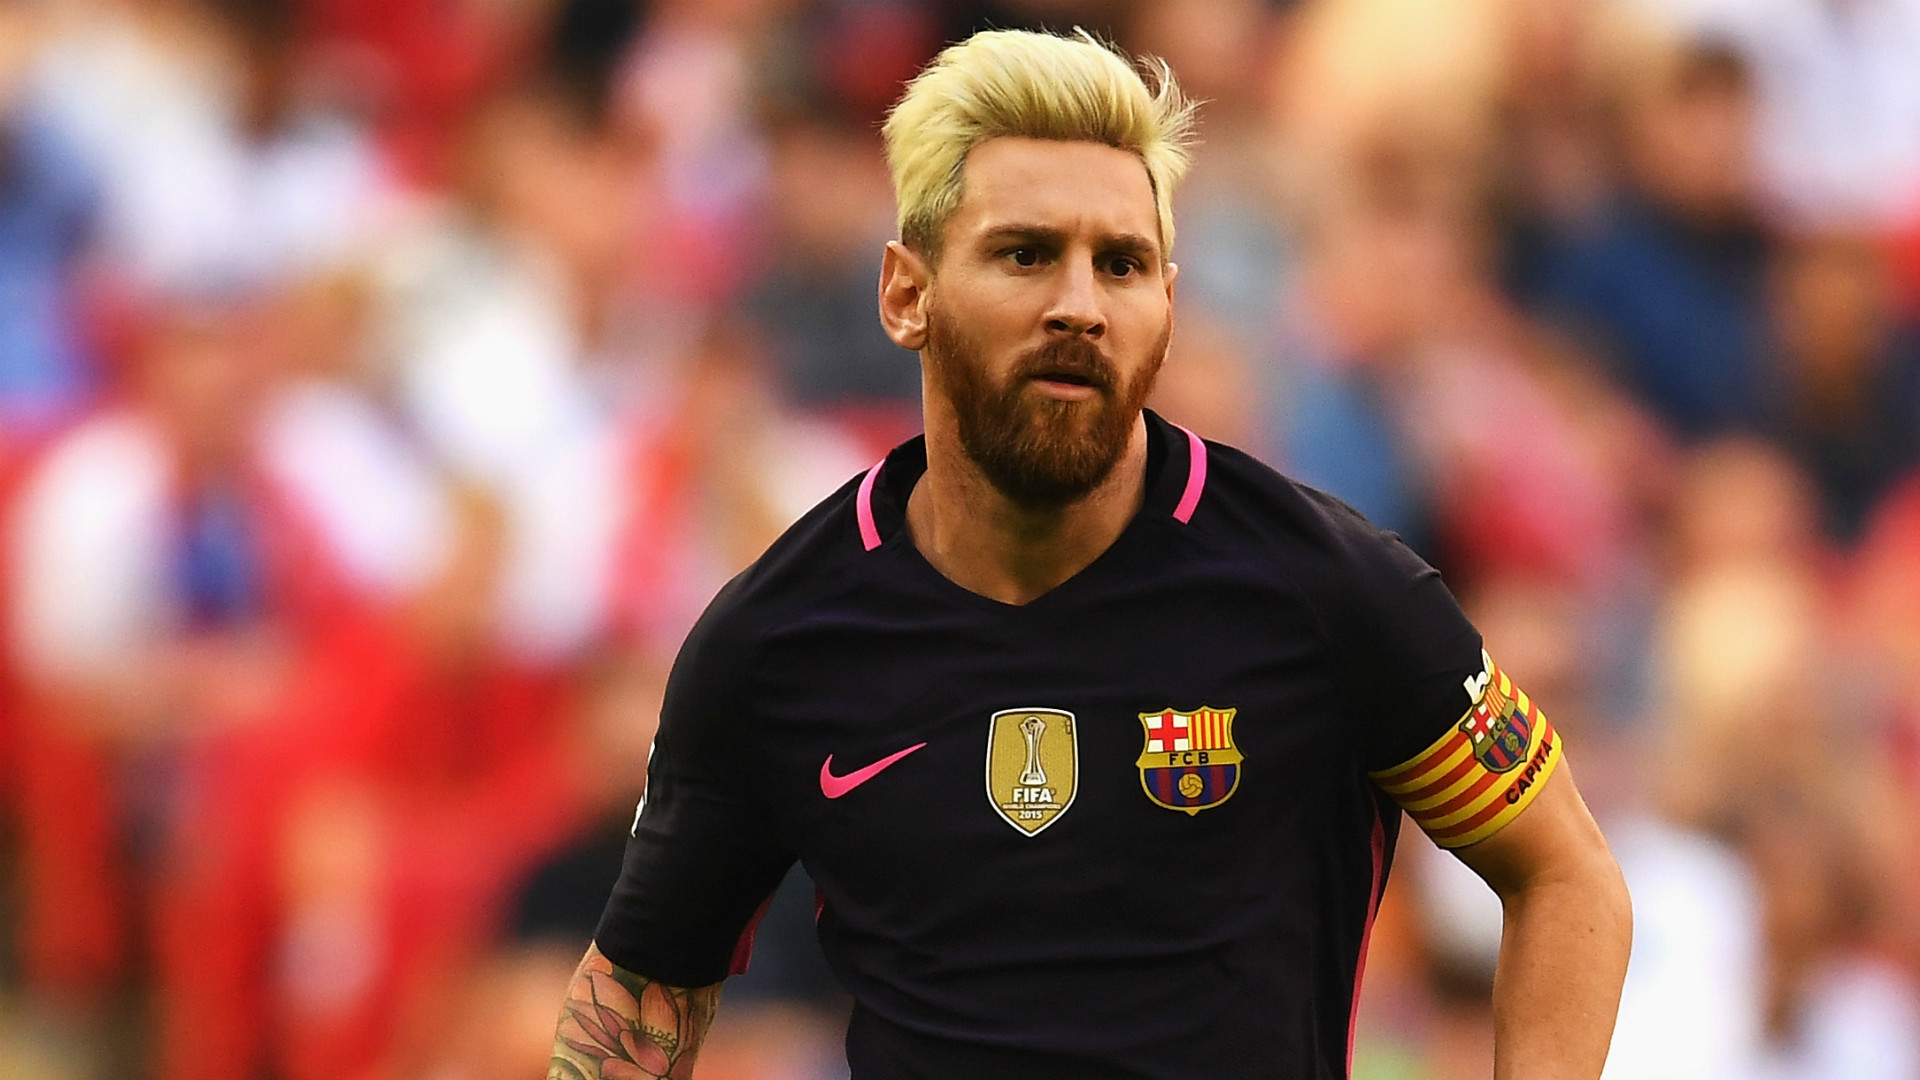 lionel messi hd wallpapers,player,football player,facial hair,soccer player,team sport